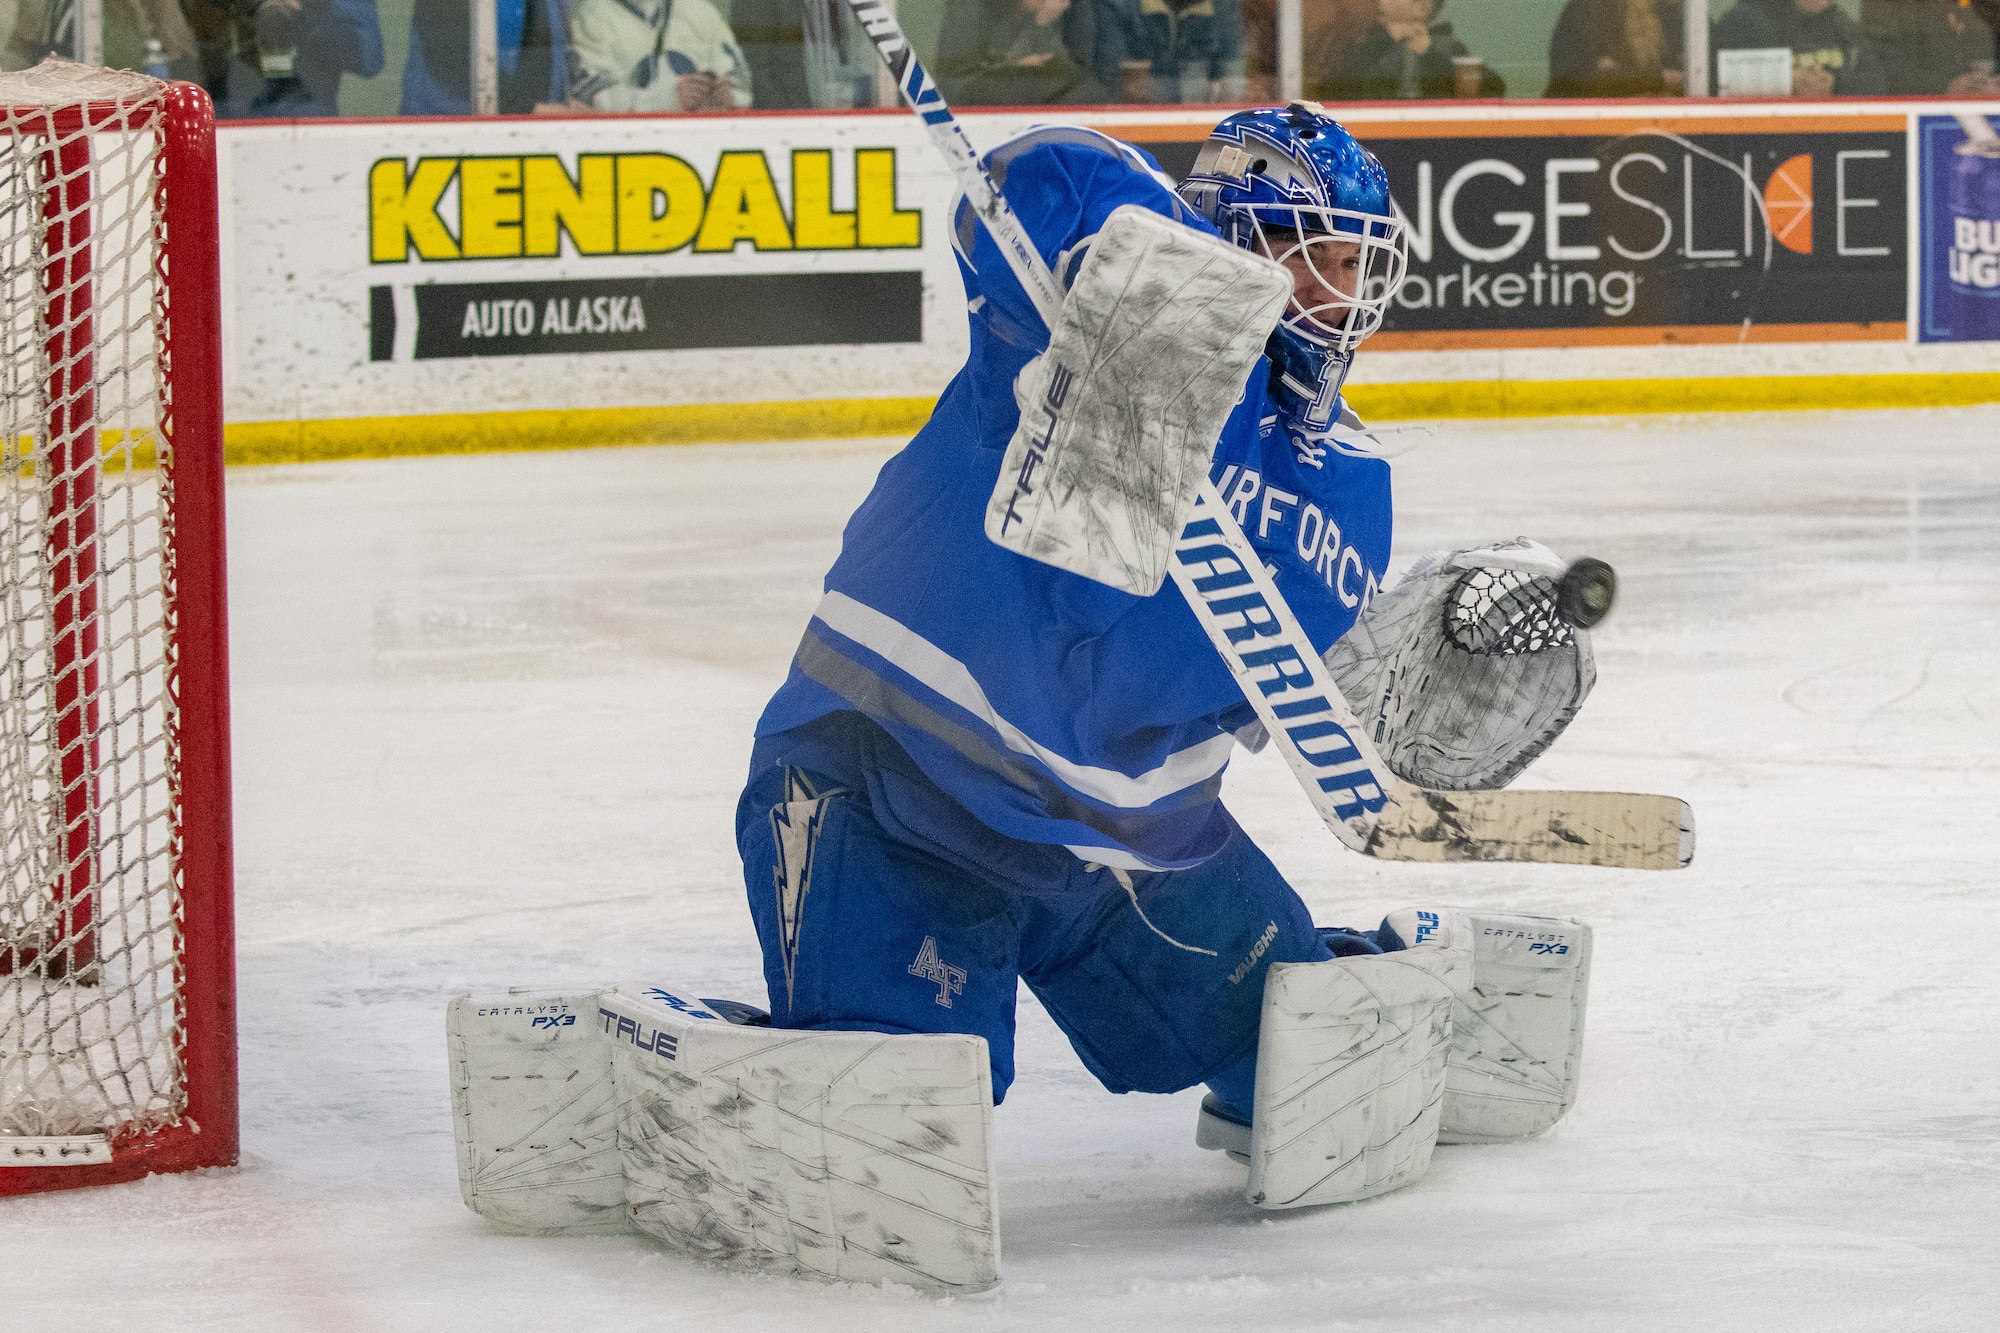 U.S. Air Force Academy hockey competes against University of Alaska Anchorage in Anchorage, Alaska.